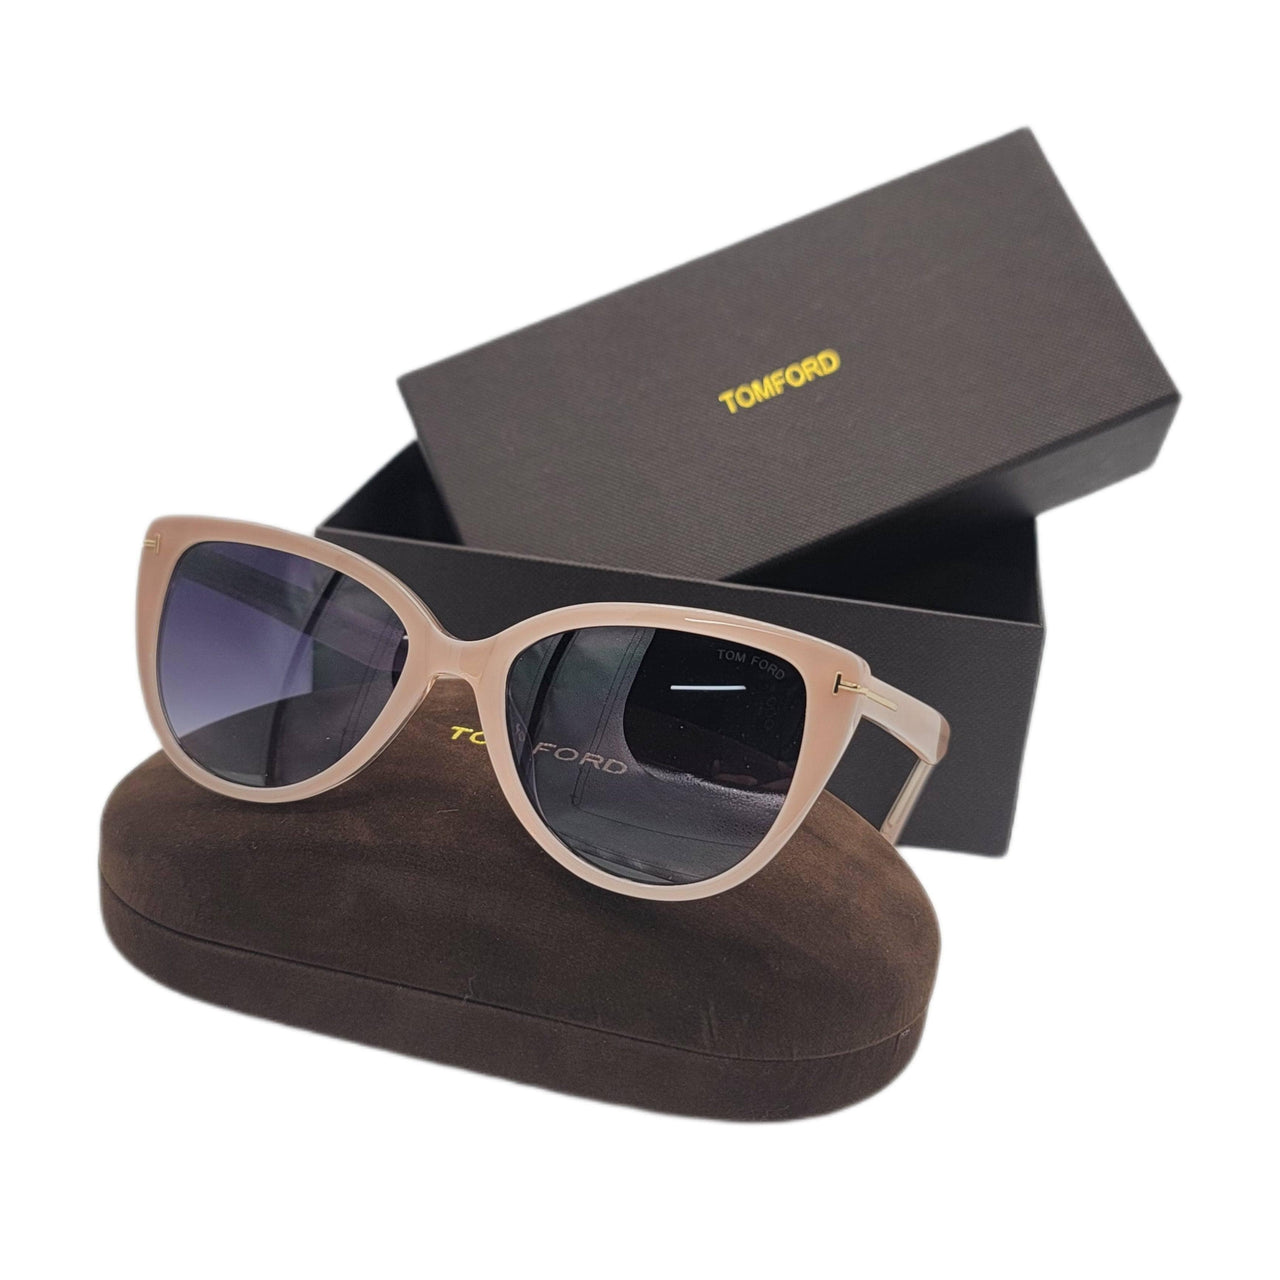 The Bag Couture Sunglasses Tom Ford Sunglasses 1PN